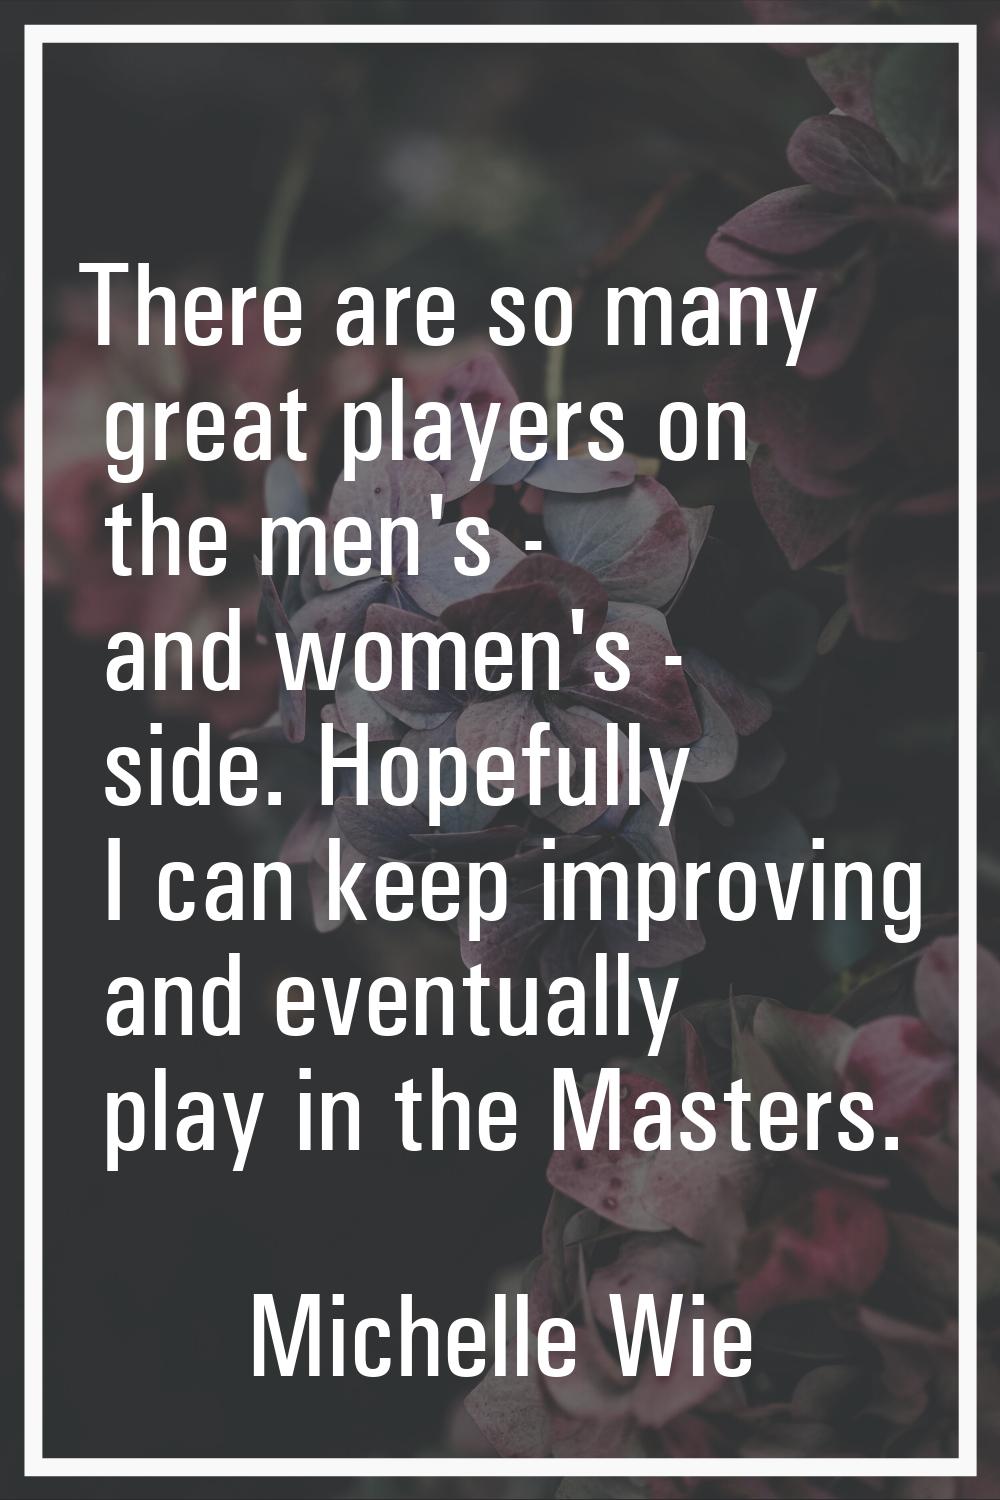 There are so many great players on the men's - and women's - side. Hopefully I can keep improving a